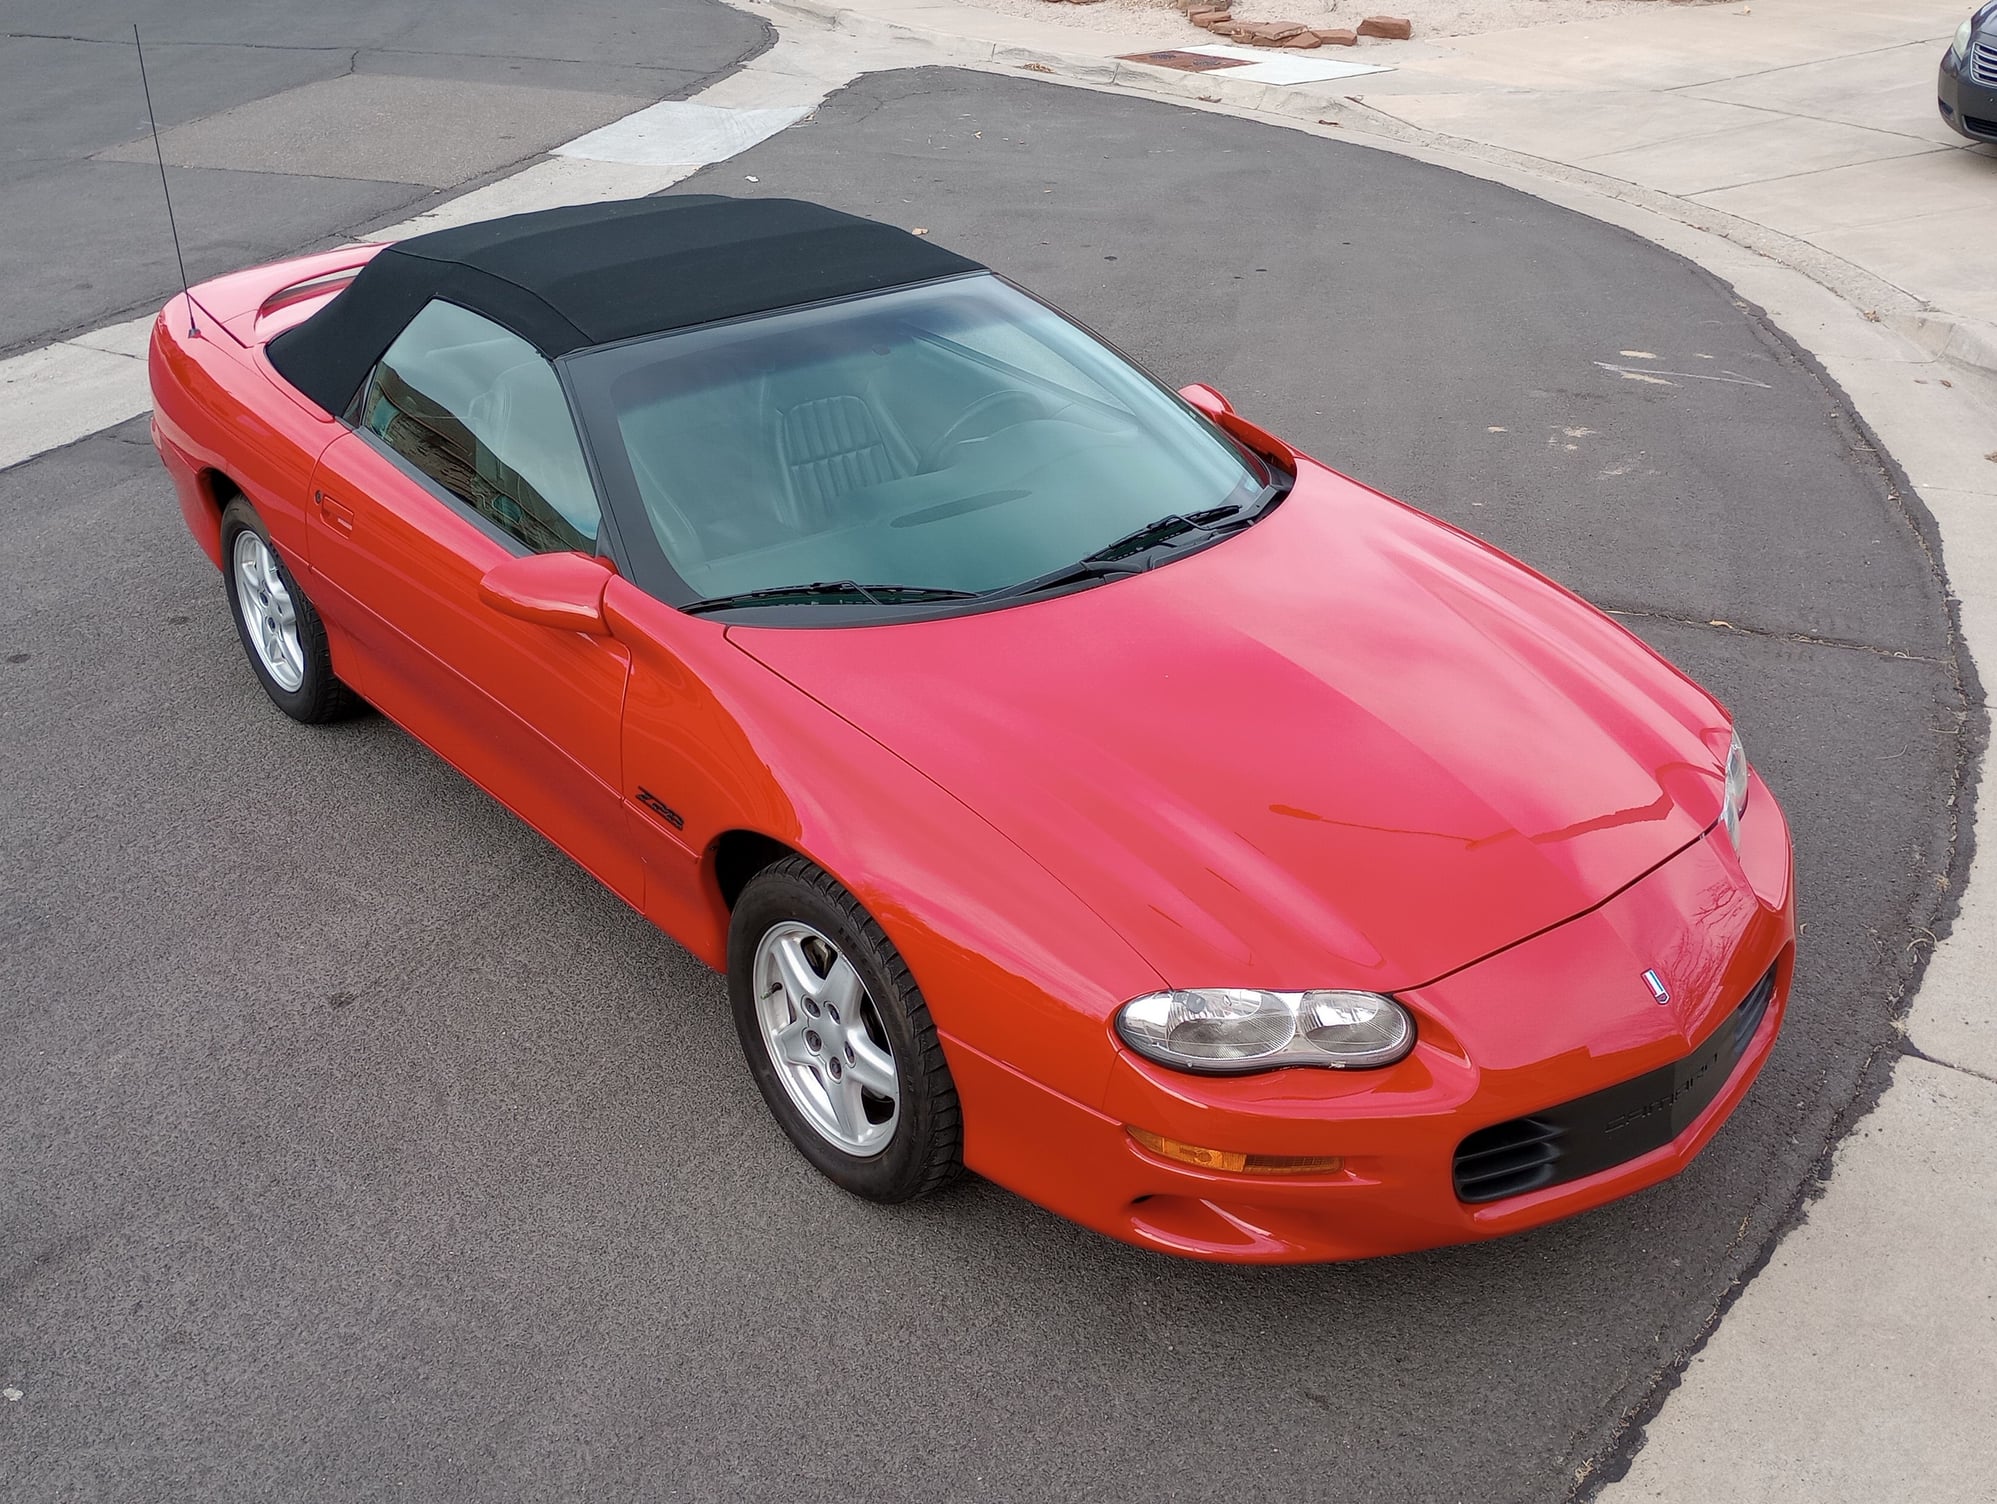 1998 Chevrolet Camaro - 1998 Z28 convertible, 42k miles, very clean - Used - VIN 1234567890xxxxxxx - 42,000 Miles - 8 cyl - 2WD - Automatic - Convertible - Red - Albuquerque, NM 87114, United States